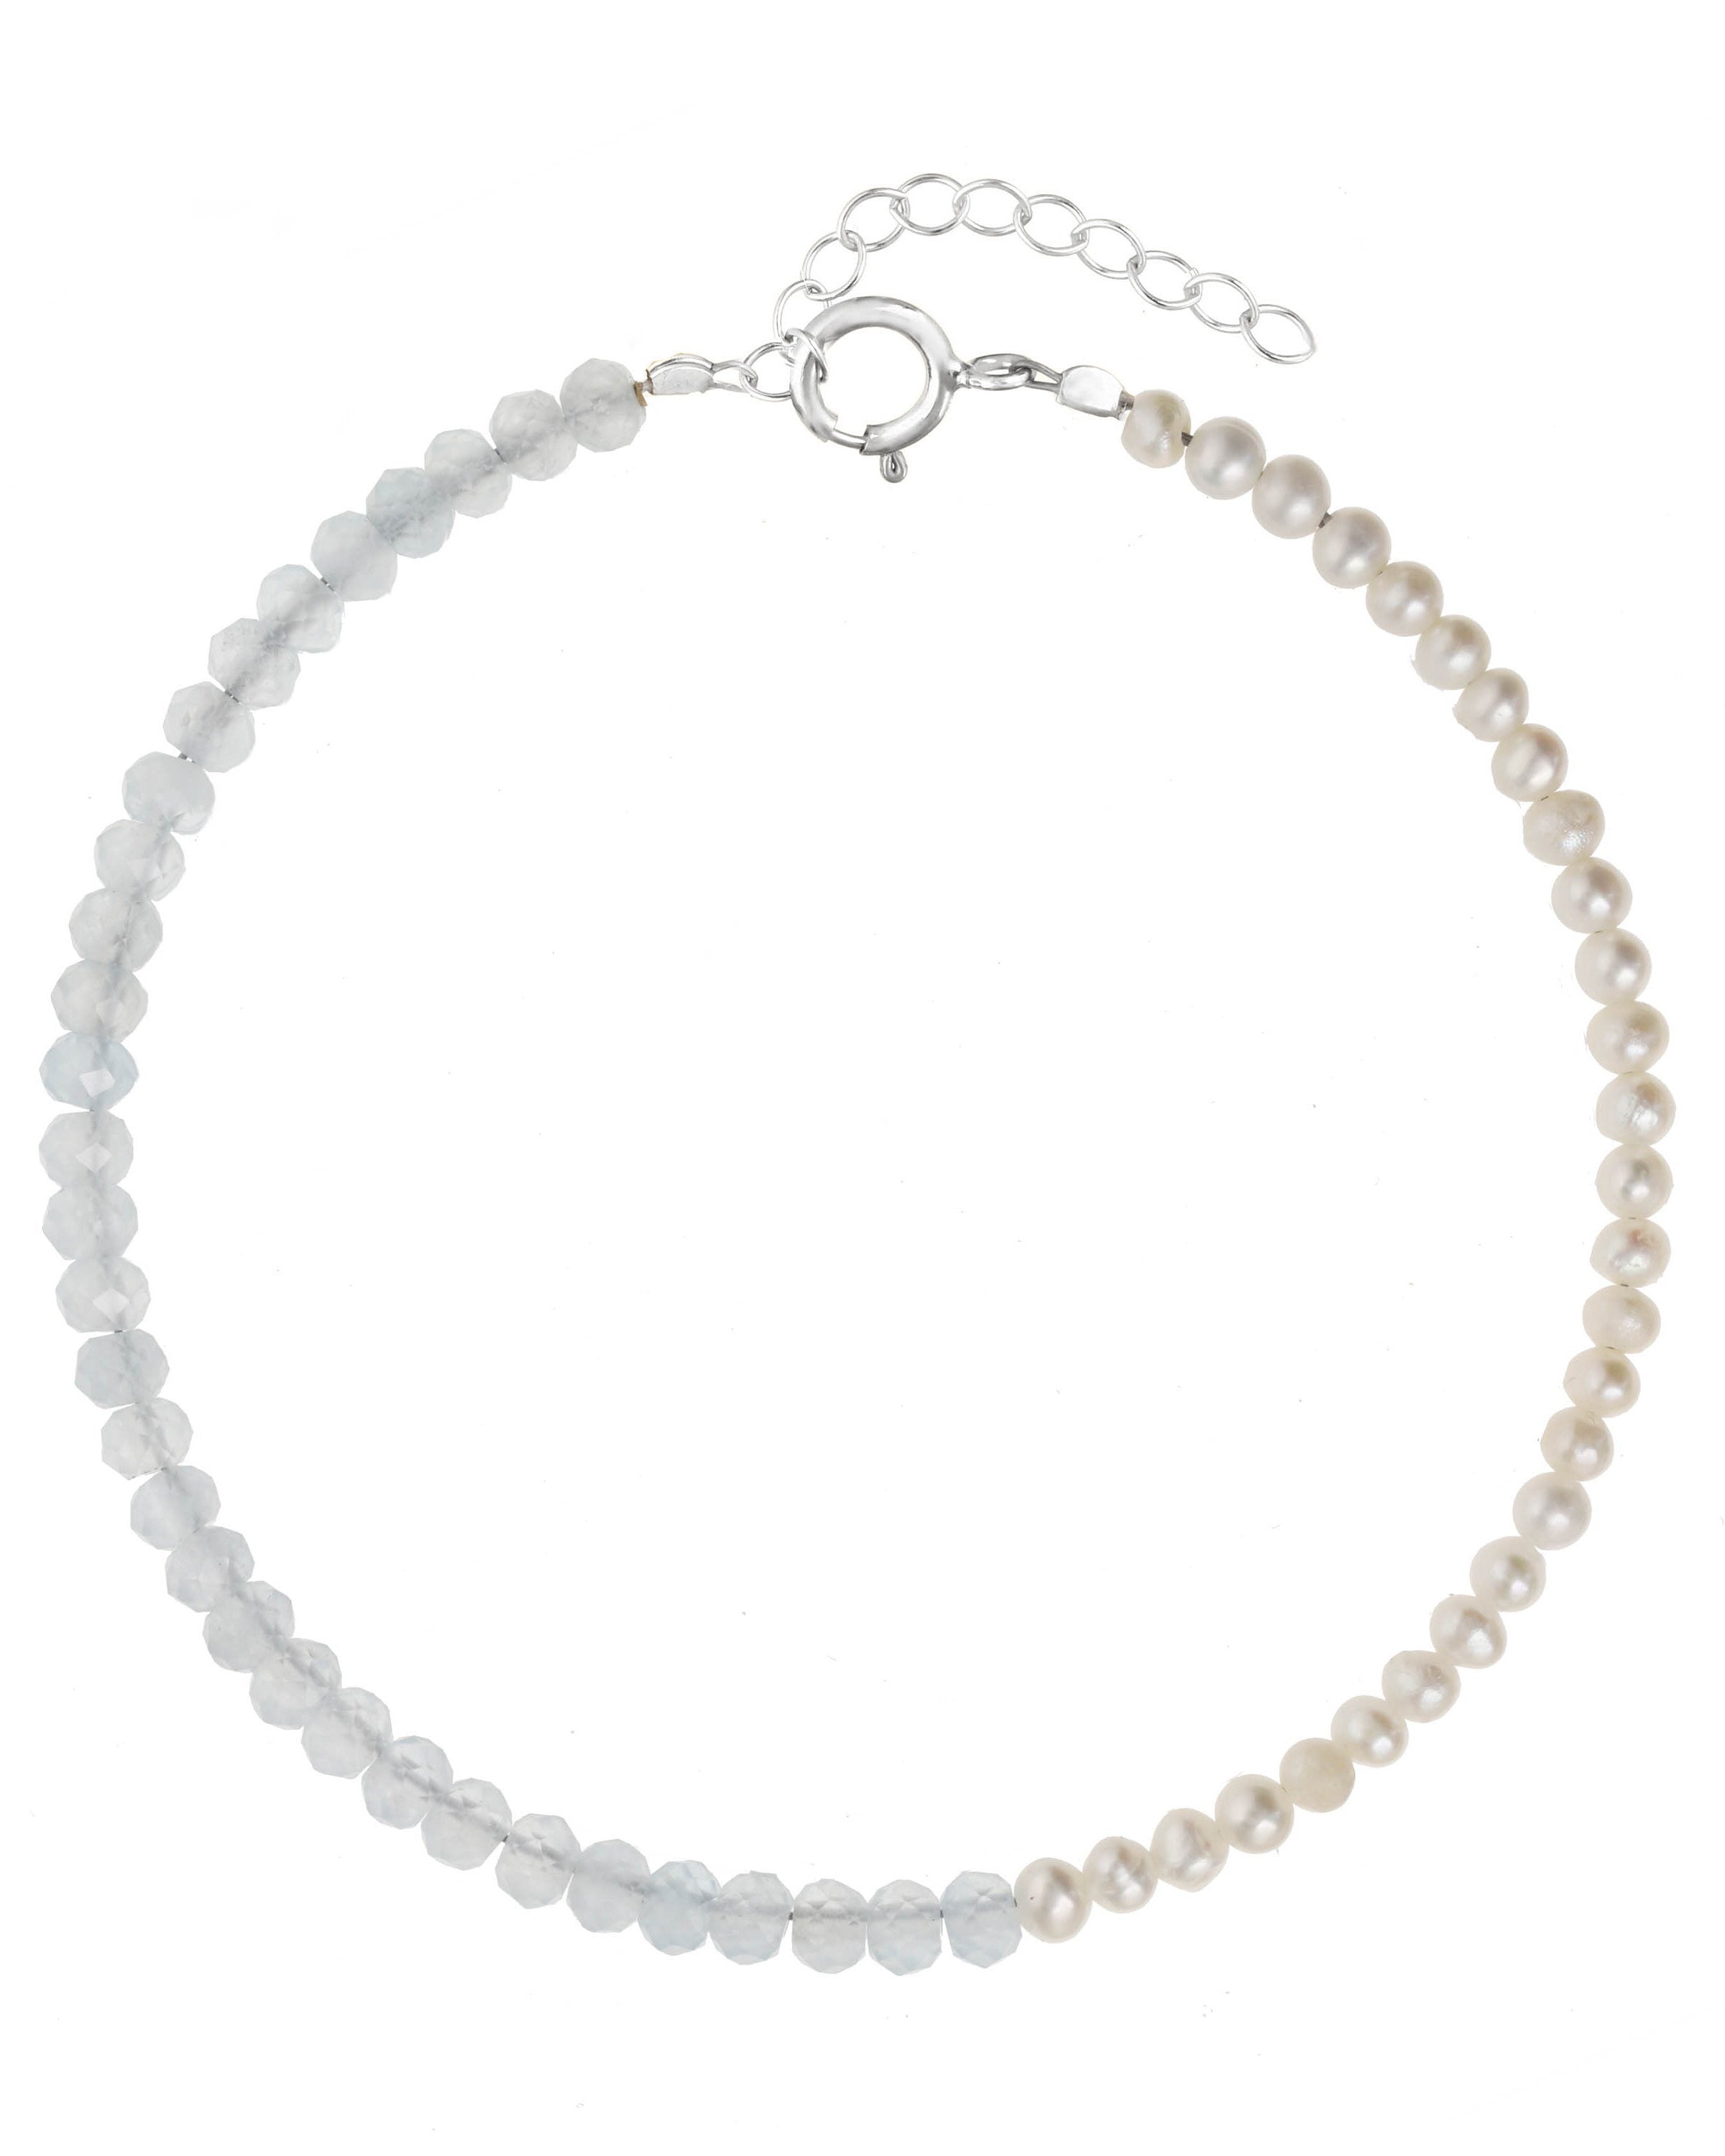 Elo Bracelet by KOZAKH. A 6 to 7 inch adjustable length bracelet, crafted in Sterling Silver. Half of the bracelet strand features 3.5mm Freshwater Pearls and 3.5mm Faceted Aquamarine beads on the other half.